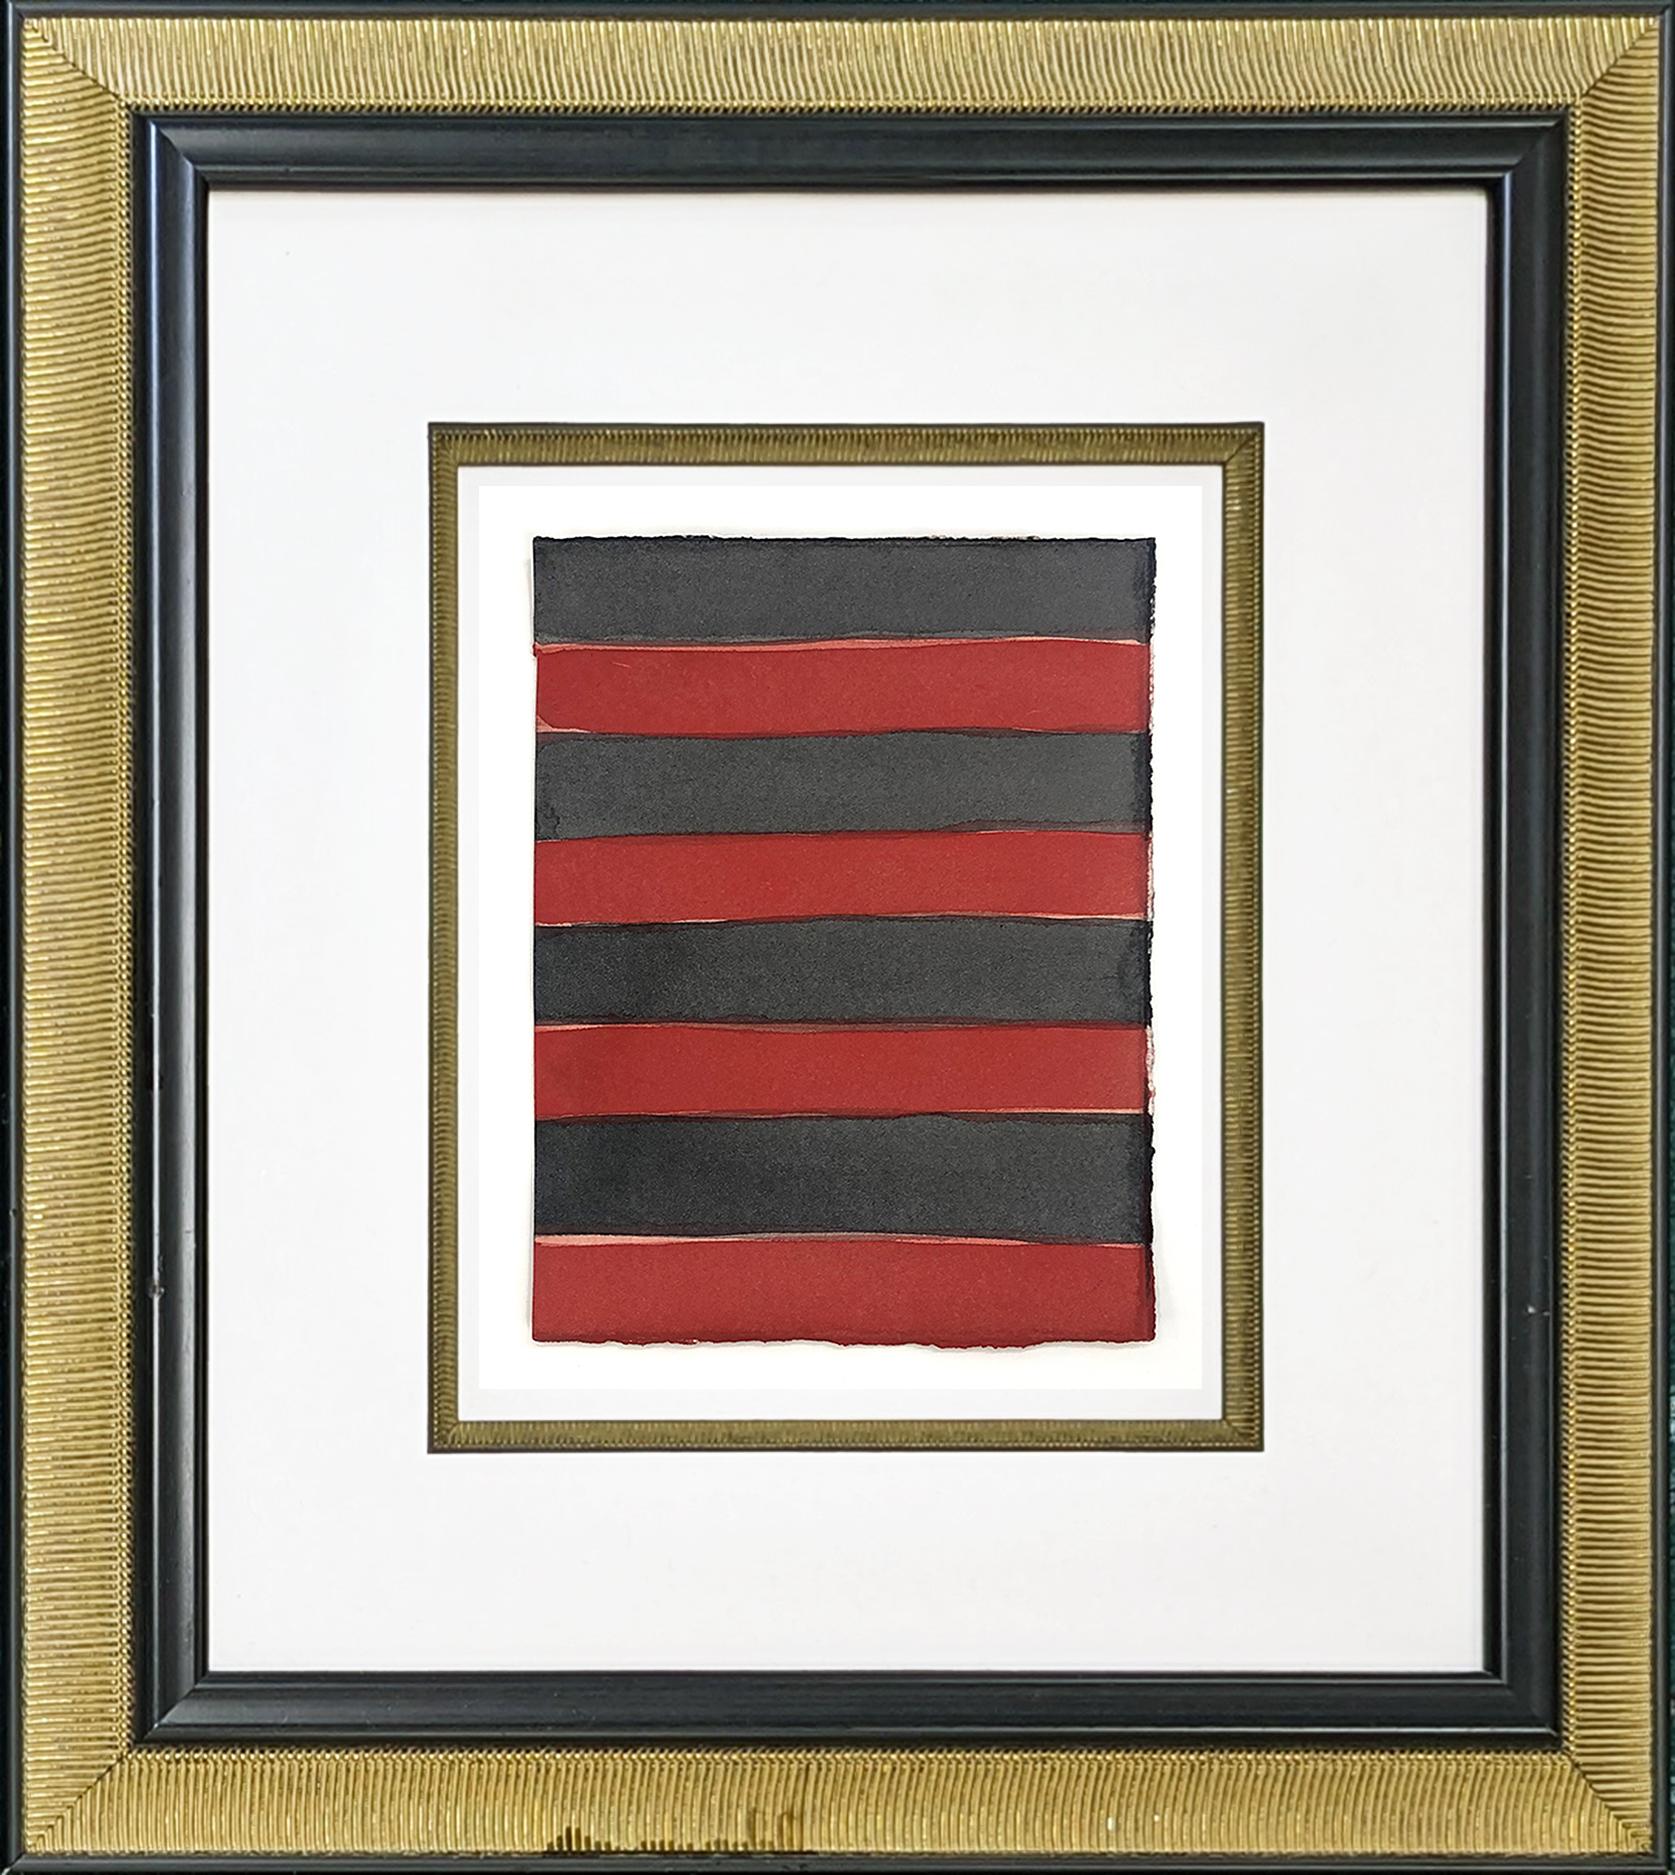 UNFRAMED (UNIQUE WATERCOLOR) - Art by Sean Scully